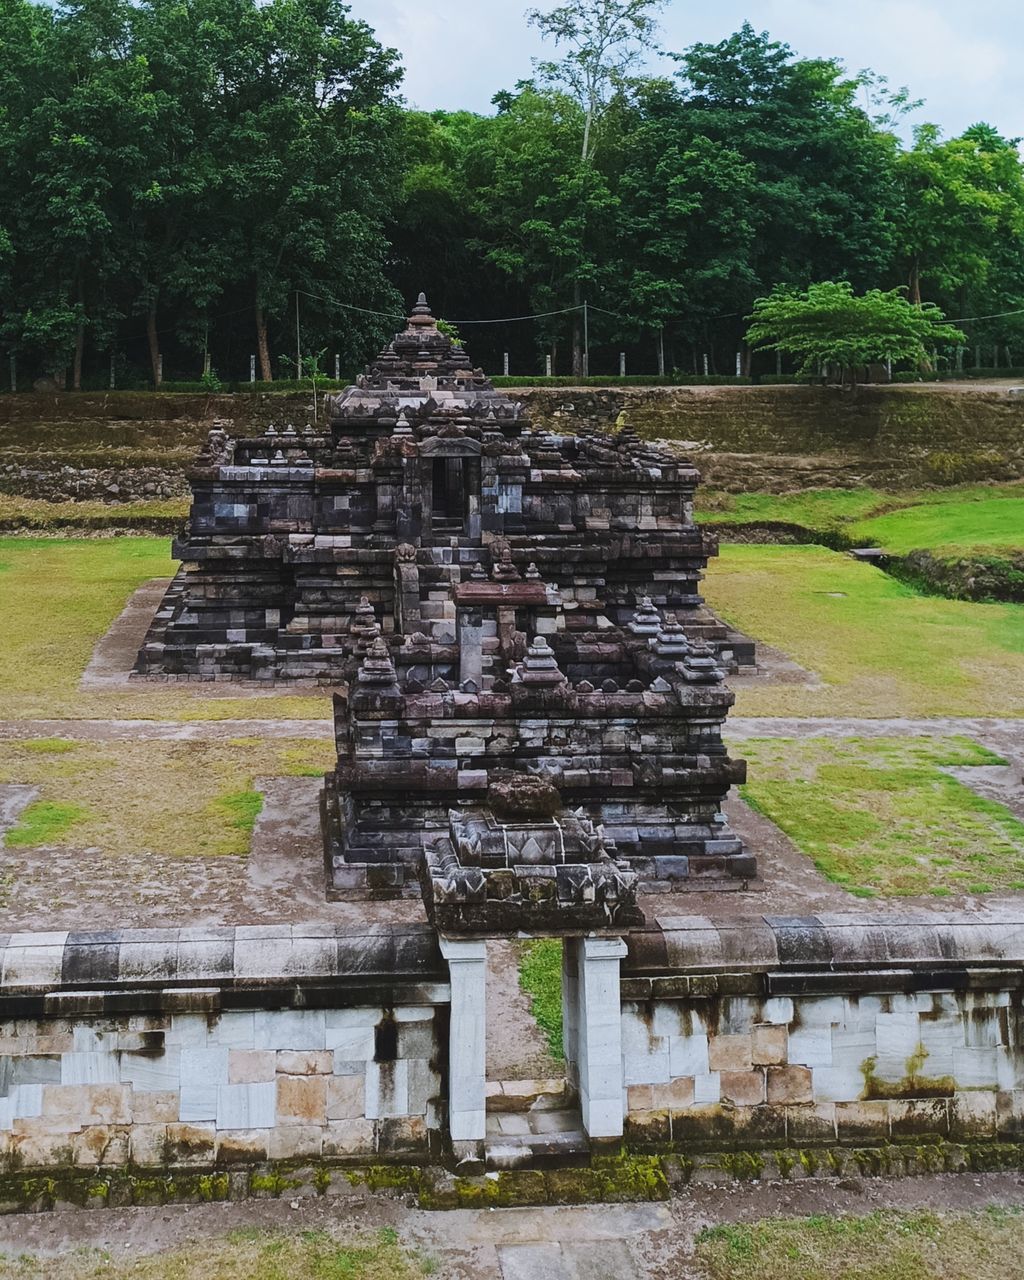 architecture, plant, tree, built structure, religion, archaeological site, temple - building, ruins, history, the past, belief, nature, spirituality, ancient, no people, travel destinations, place of worship, building, travel, ancient history, day, building exterior, outdoors, old ruin, stone material, temple, sky, tourism, tradition, grass, environment, old, ancient civilization, landscape, pagoda